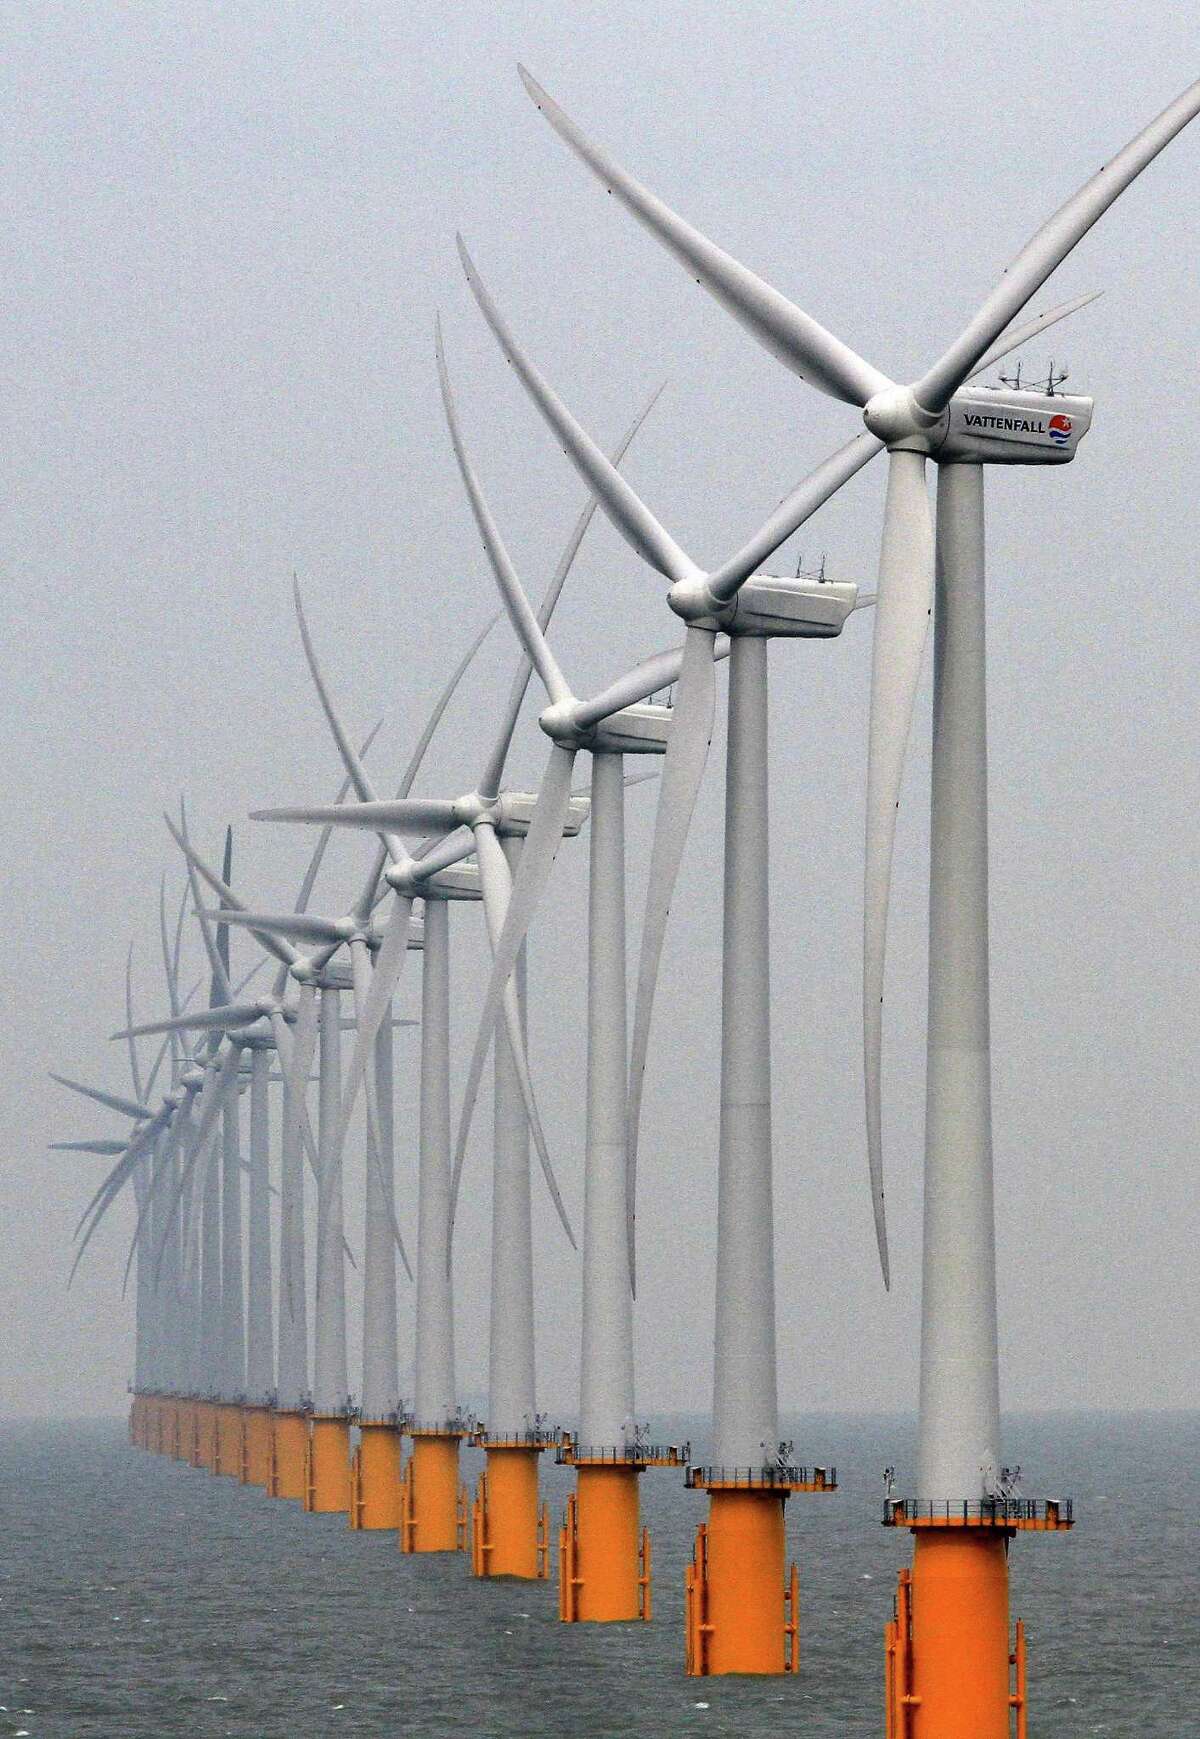 The U.S. eventually may have offshore wind farms such as this near Kent, England.